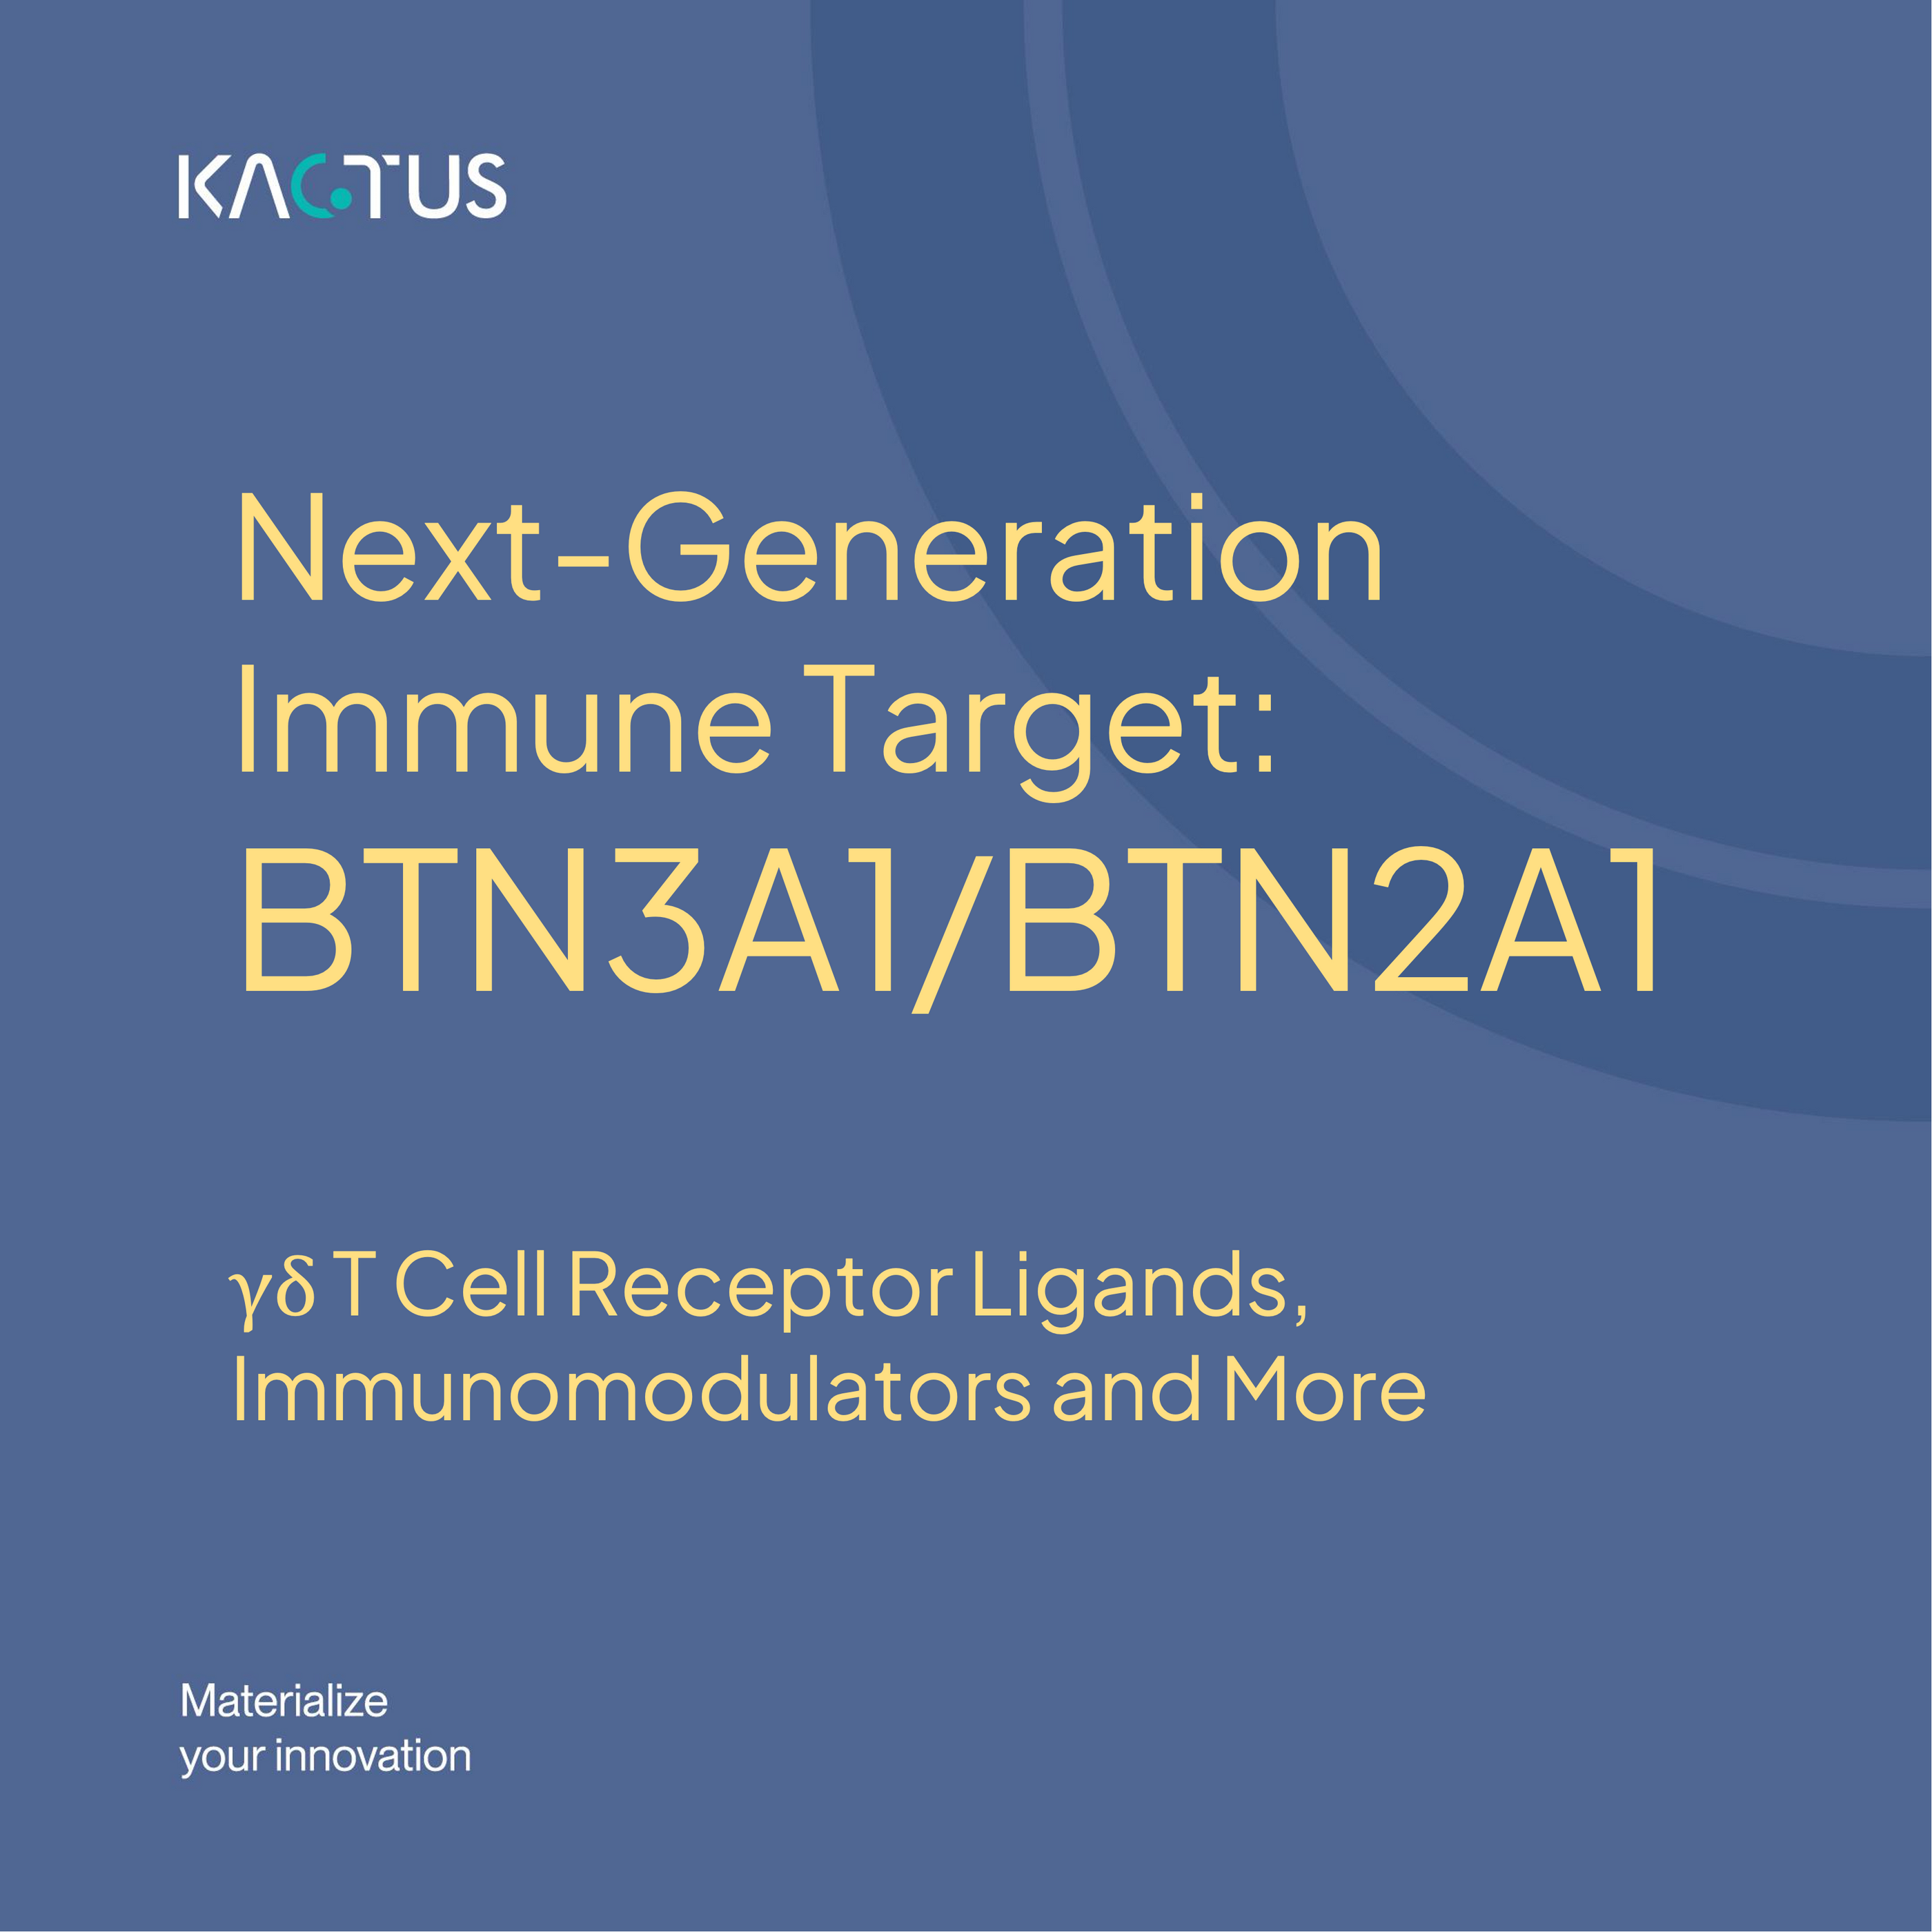 Butyrophilin (BTN) family: γδ T Cell Receptor Ligands, Immunomodulators and More